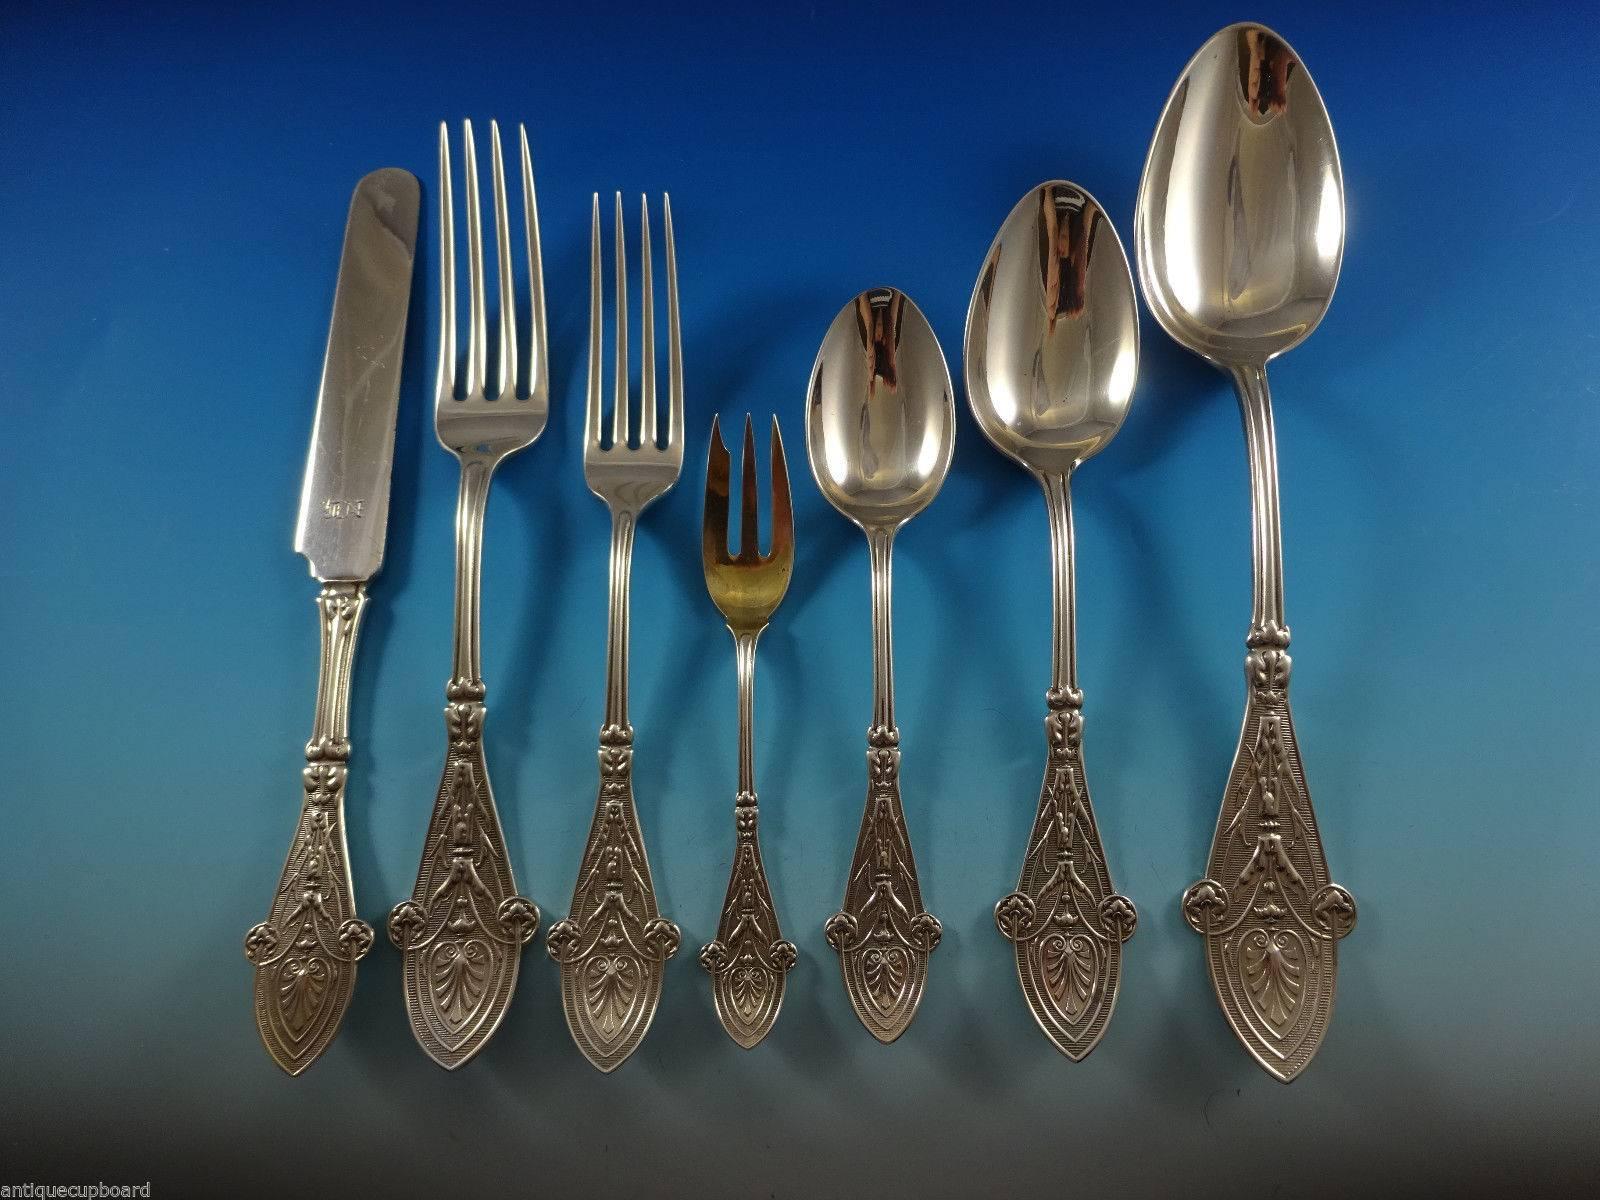 Tiffany's elegant Italian pattern was designed by Edward C. Moore and introduced in the year 1870. 

Fabulous Italian by Tiffany & Co. sterling silver flatware set, 117 pieces. This set includes:

12 knives, flat handle, all-sterling, 8